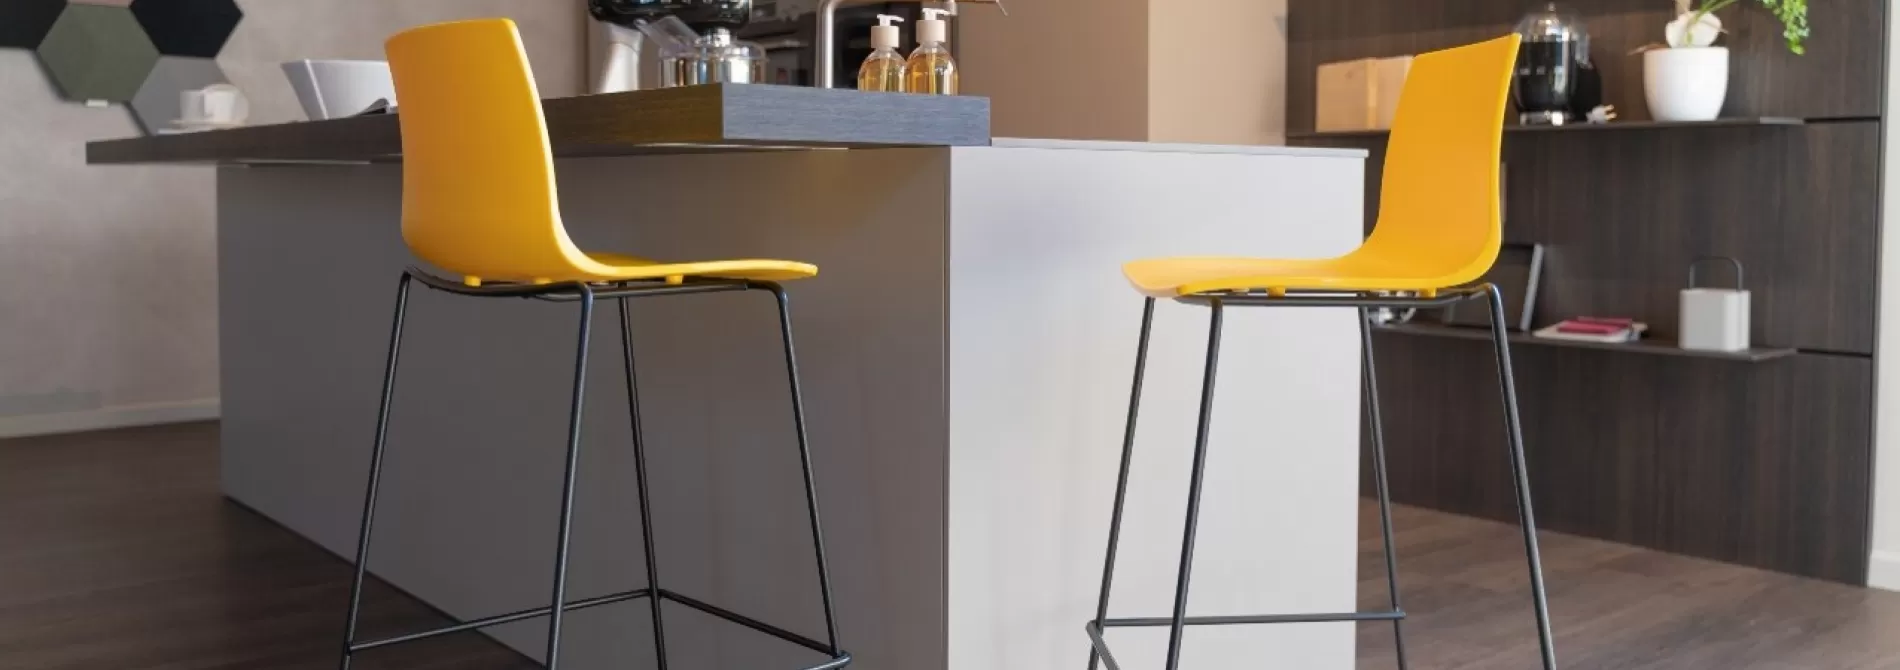 Kitchen stools ideas for any type of decor